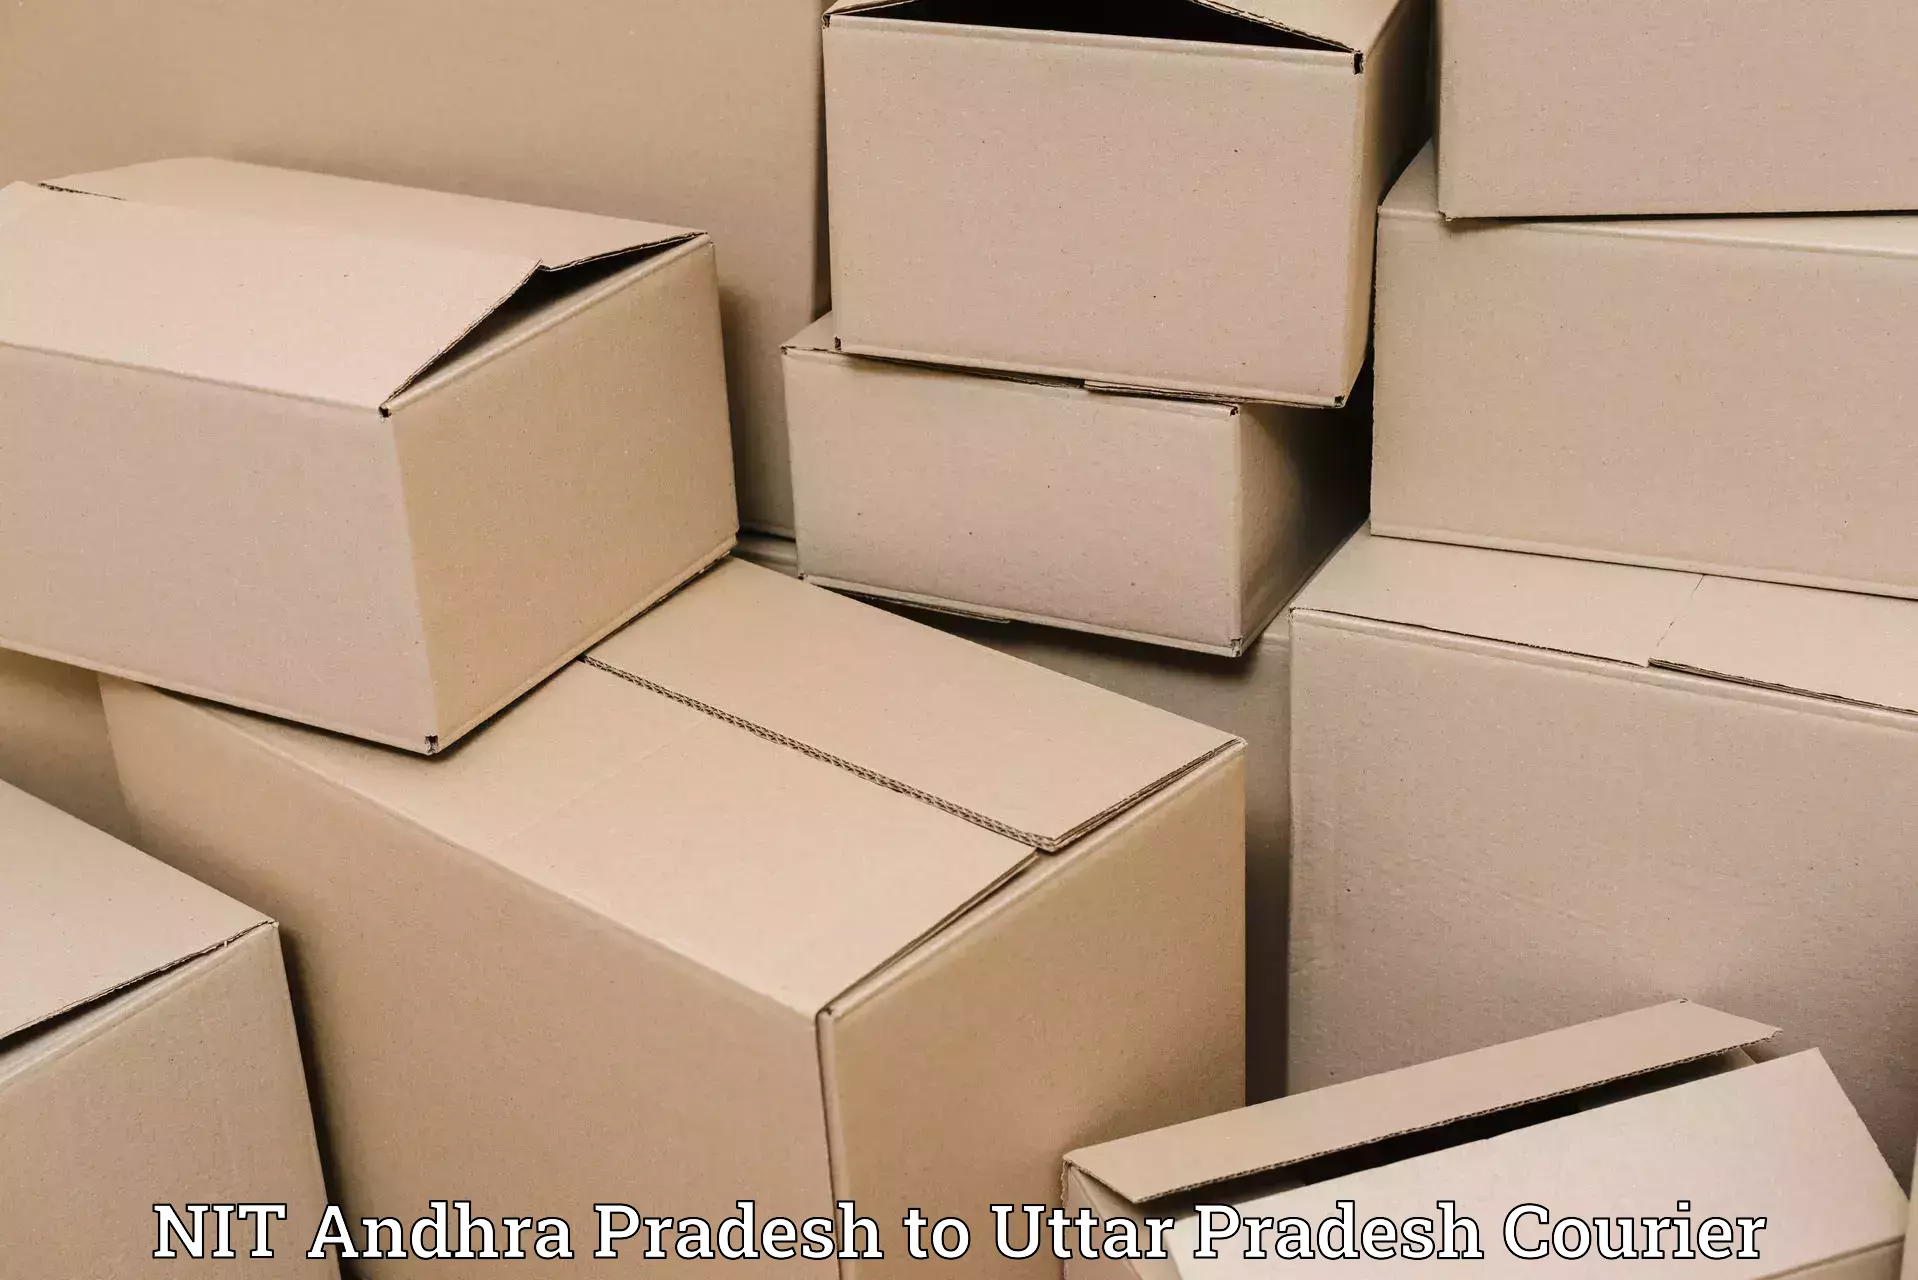 Package delivery network NIT Andhra Pradesh to Dhaurahara